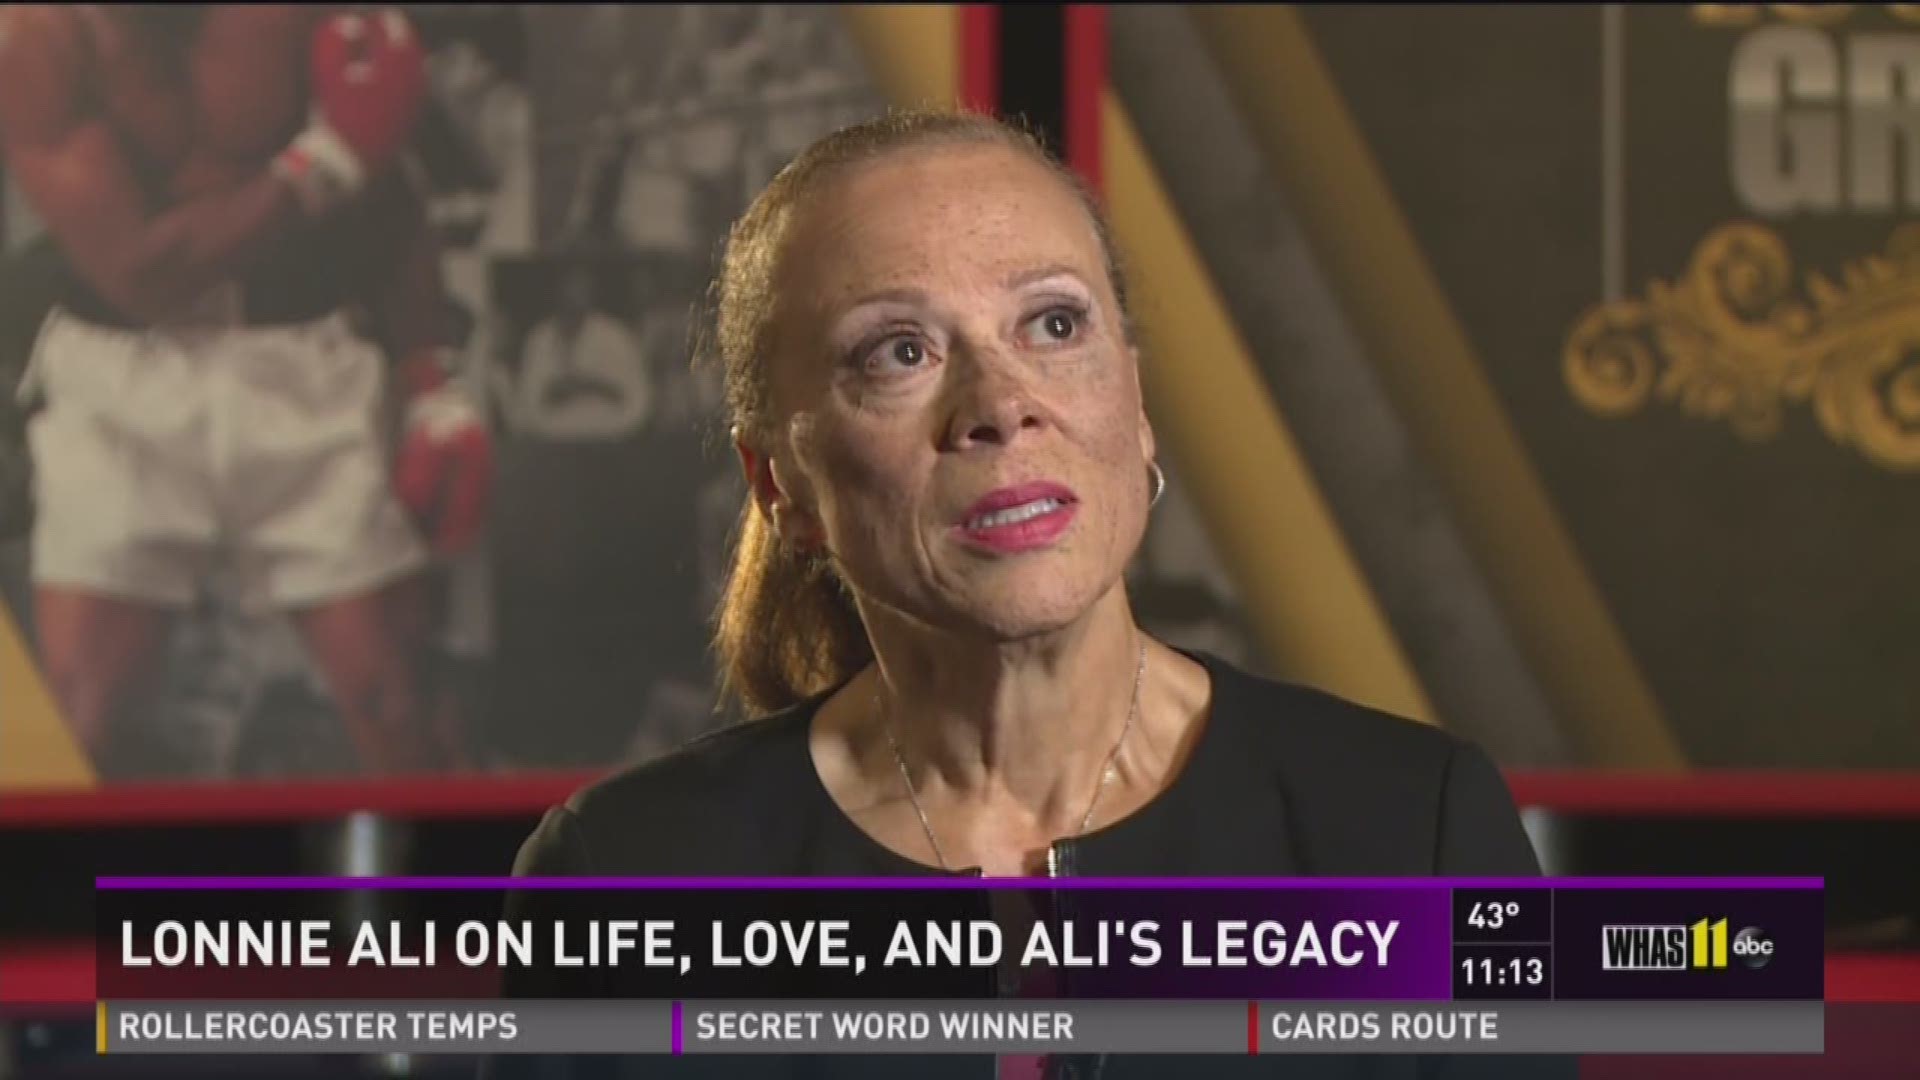 Lonnie Ali on life, love and Muhammad's legacy